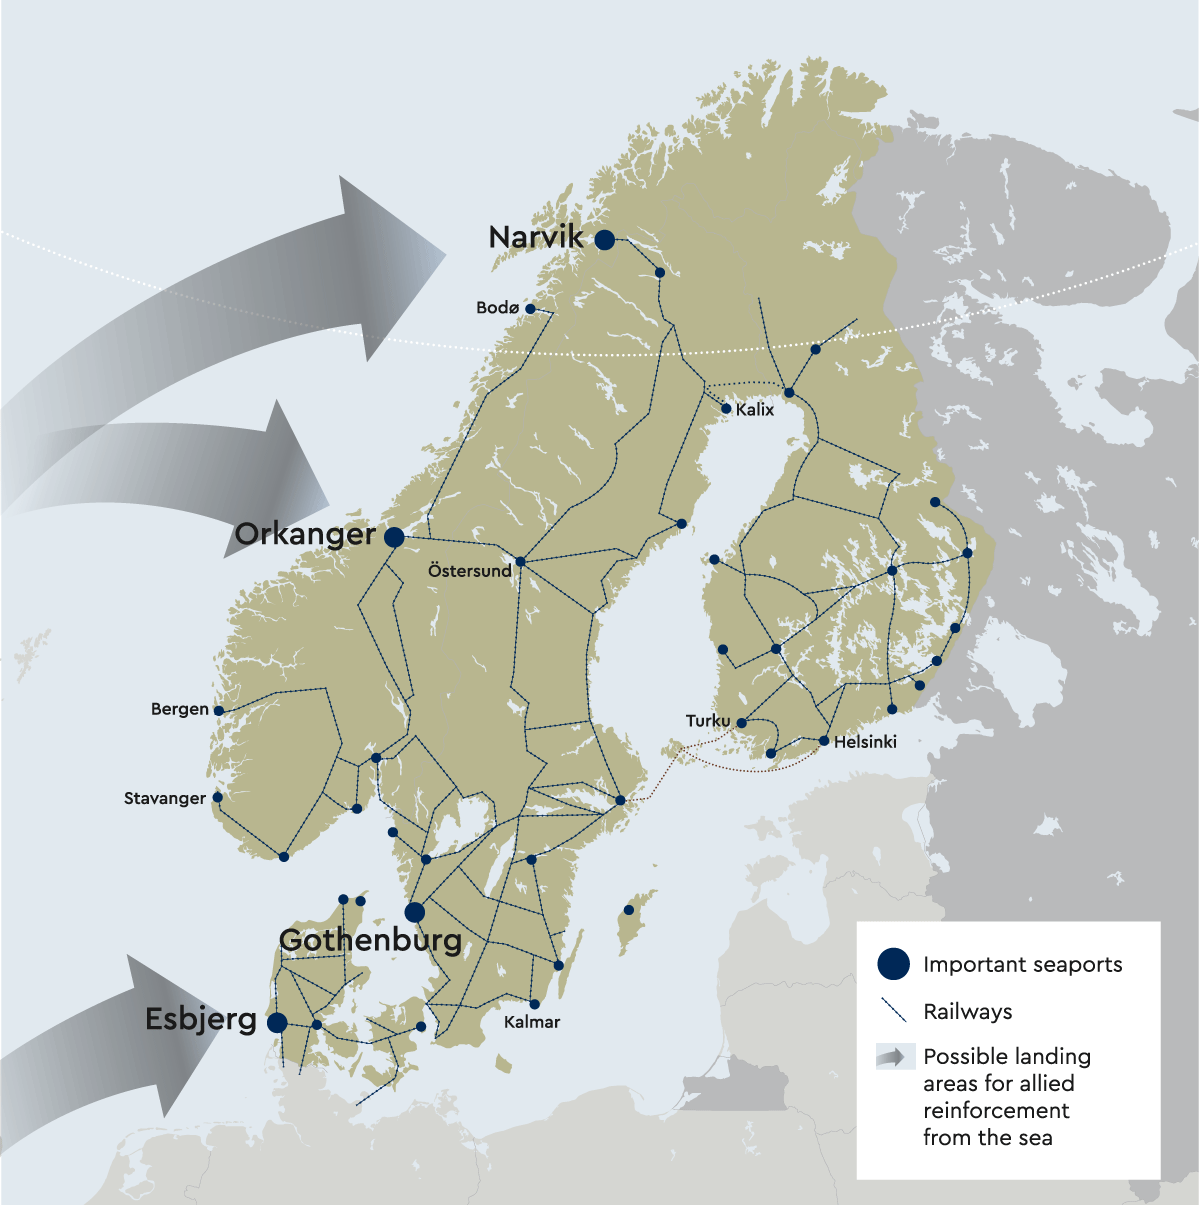 Map showing important seaports, railways, and possible landing areas for allied reinforcement from the sea